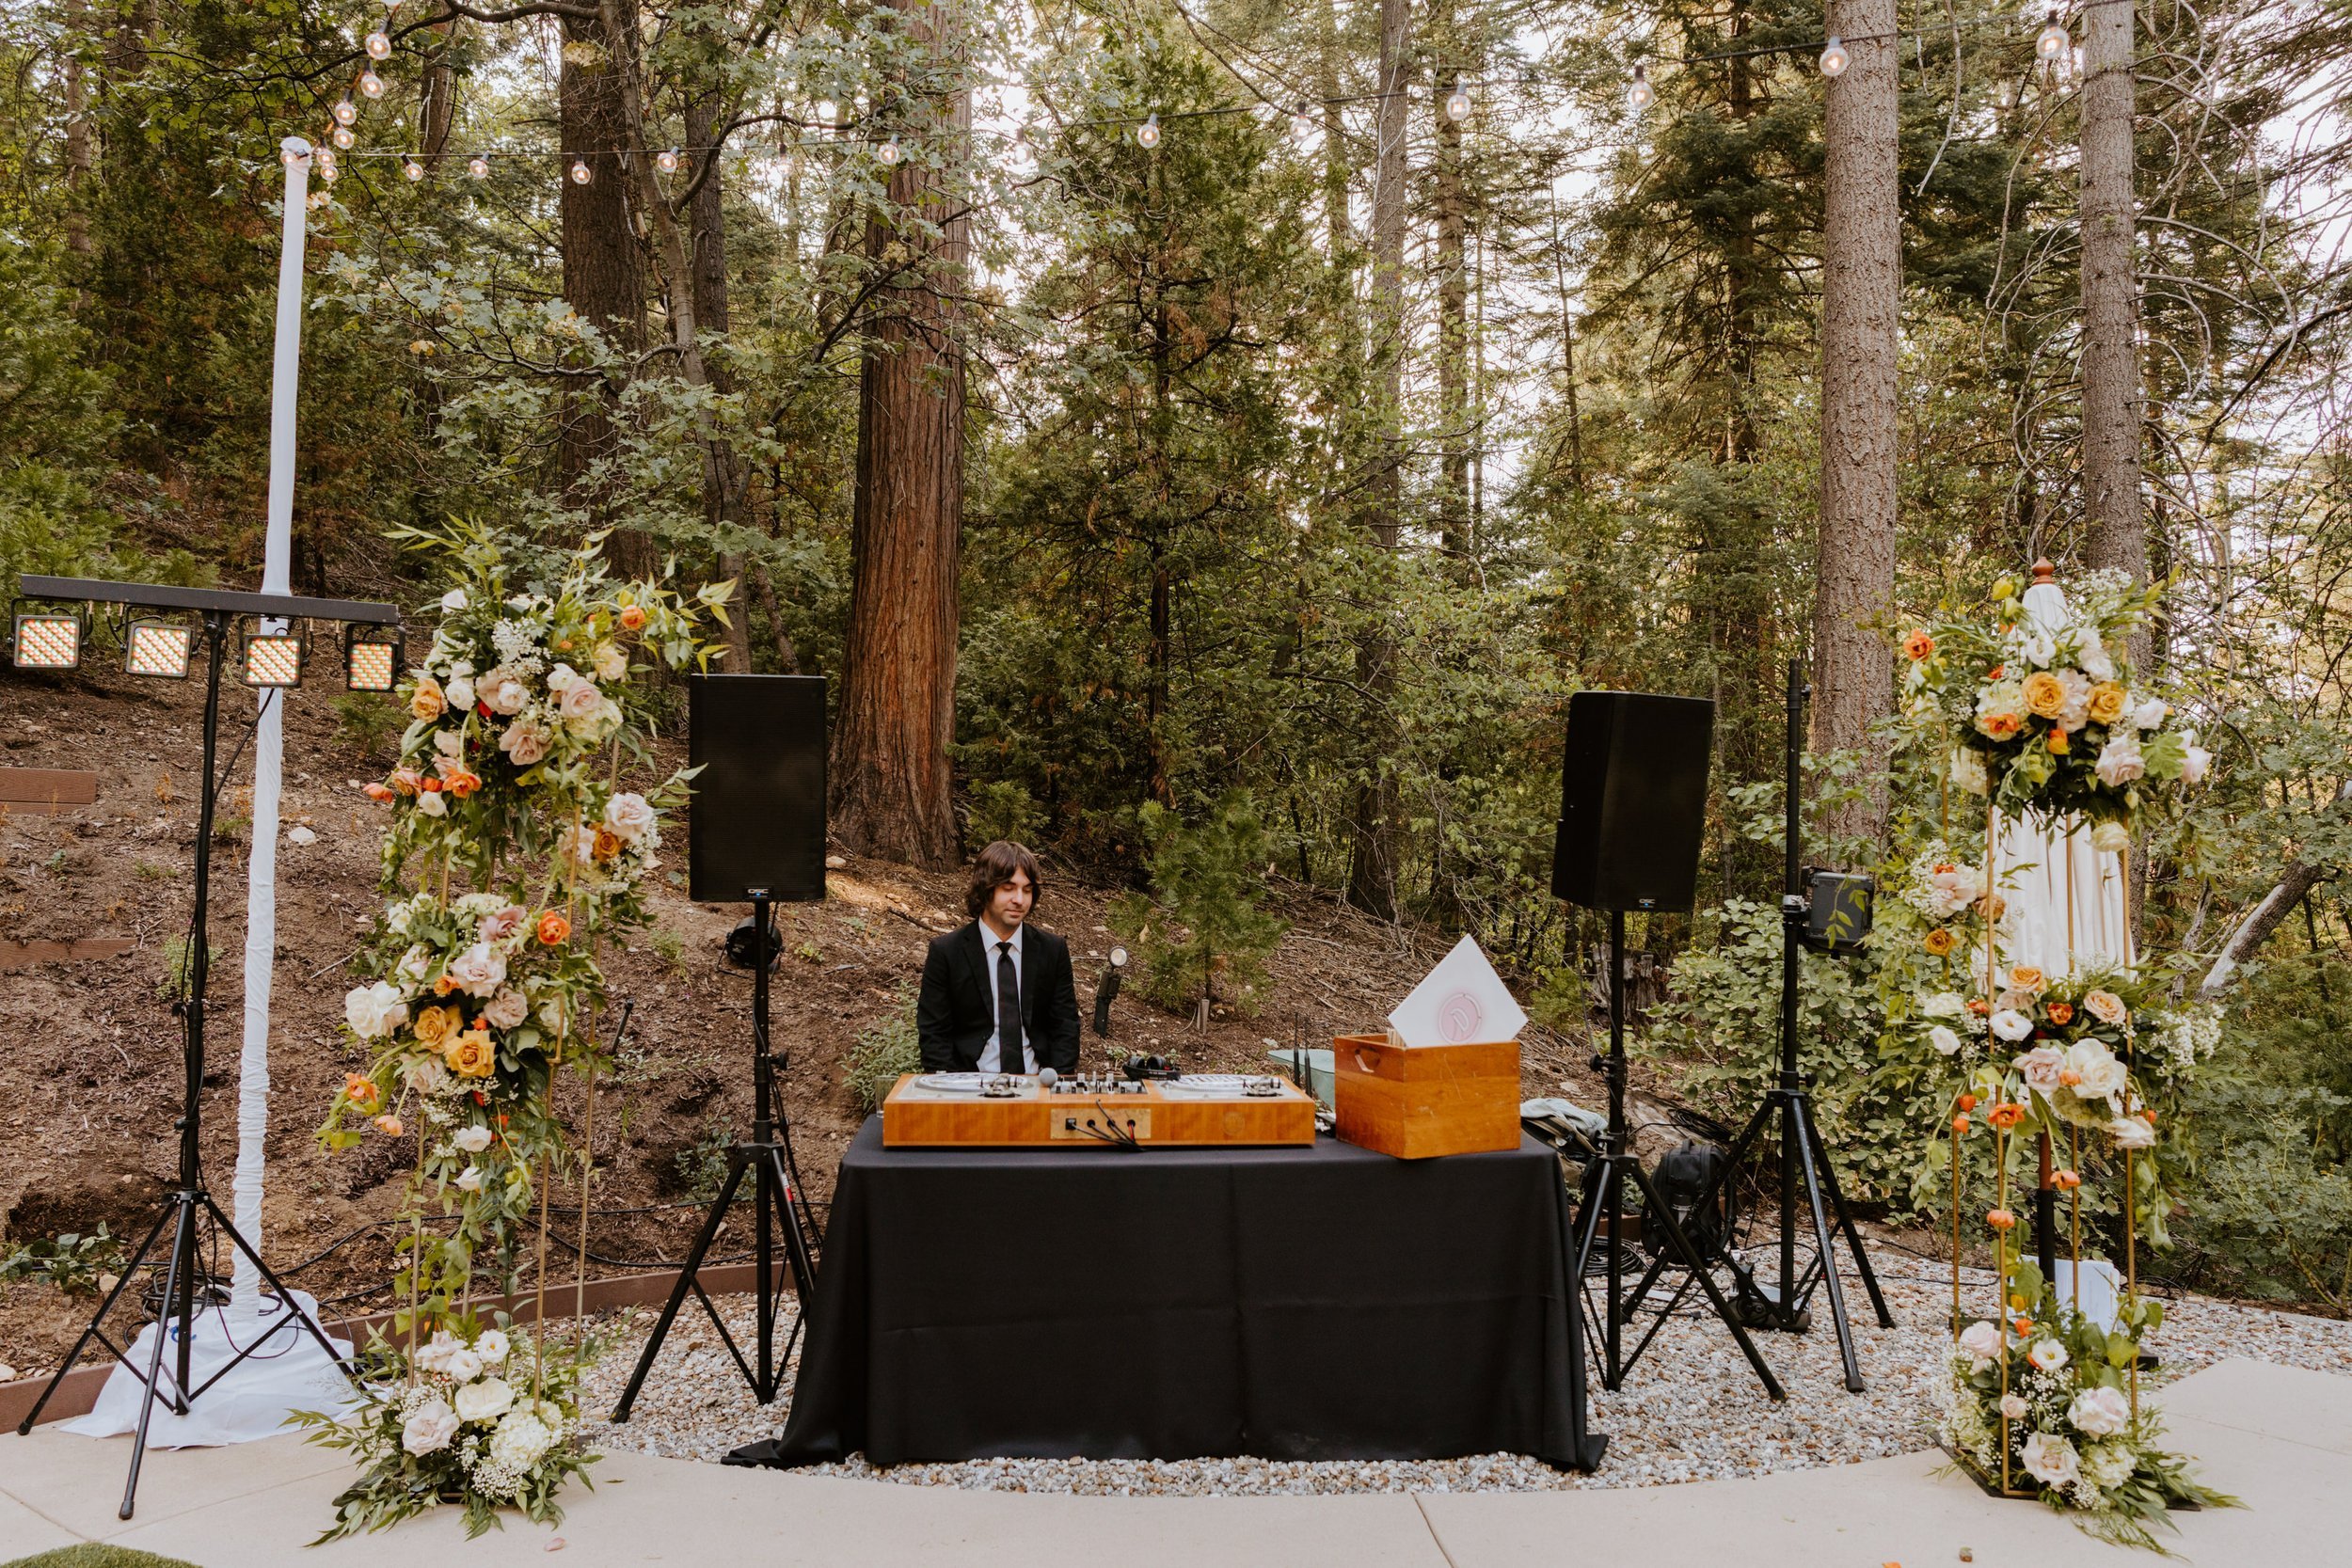 Enchanted forest castle wedding at Castle in the Forest in Lake Arrowhead, magical castle airbnb wedding, long bridal party head table, floating cloud floral centerpiece, photography by Tida Svy